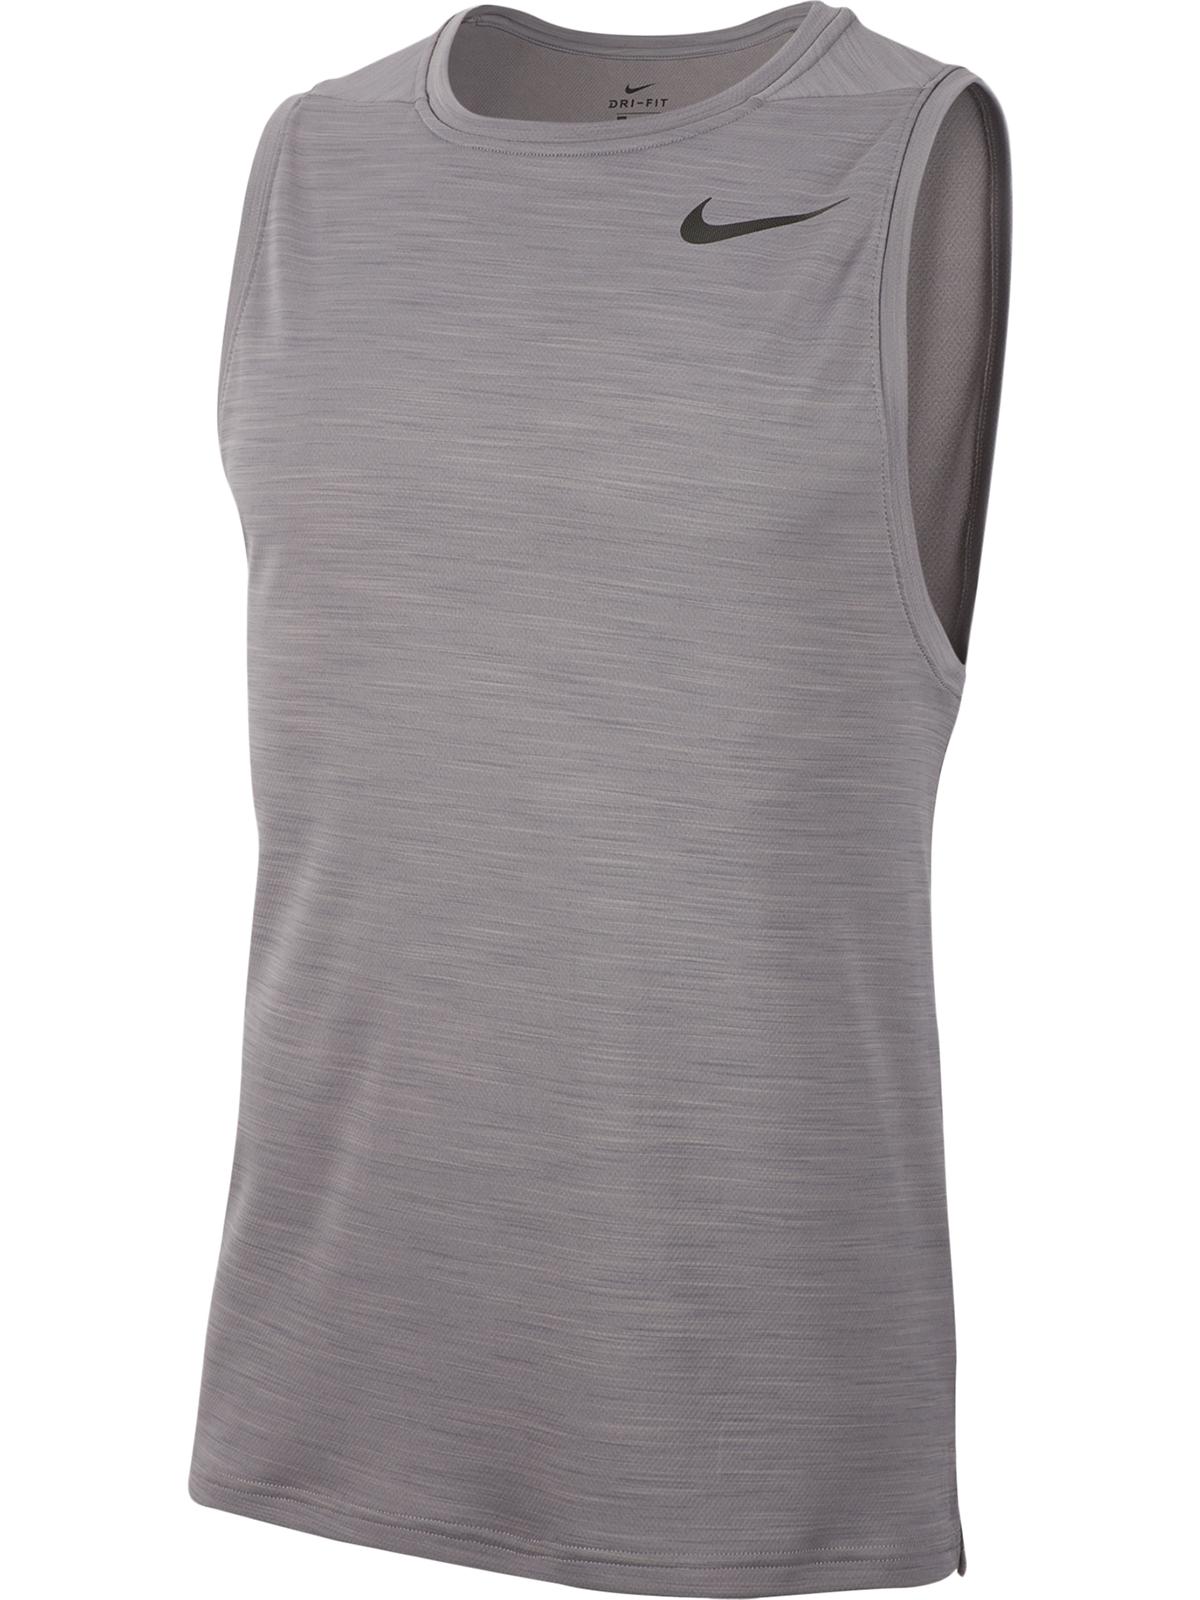 Nike Mens Training Workout Tank Top Gray L - image 1 of 2